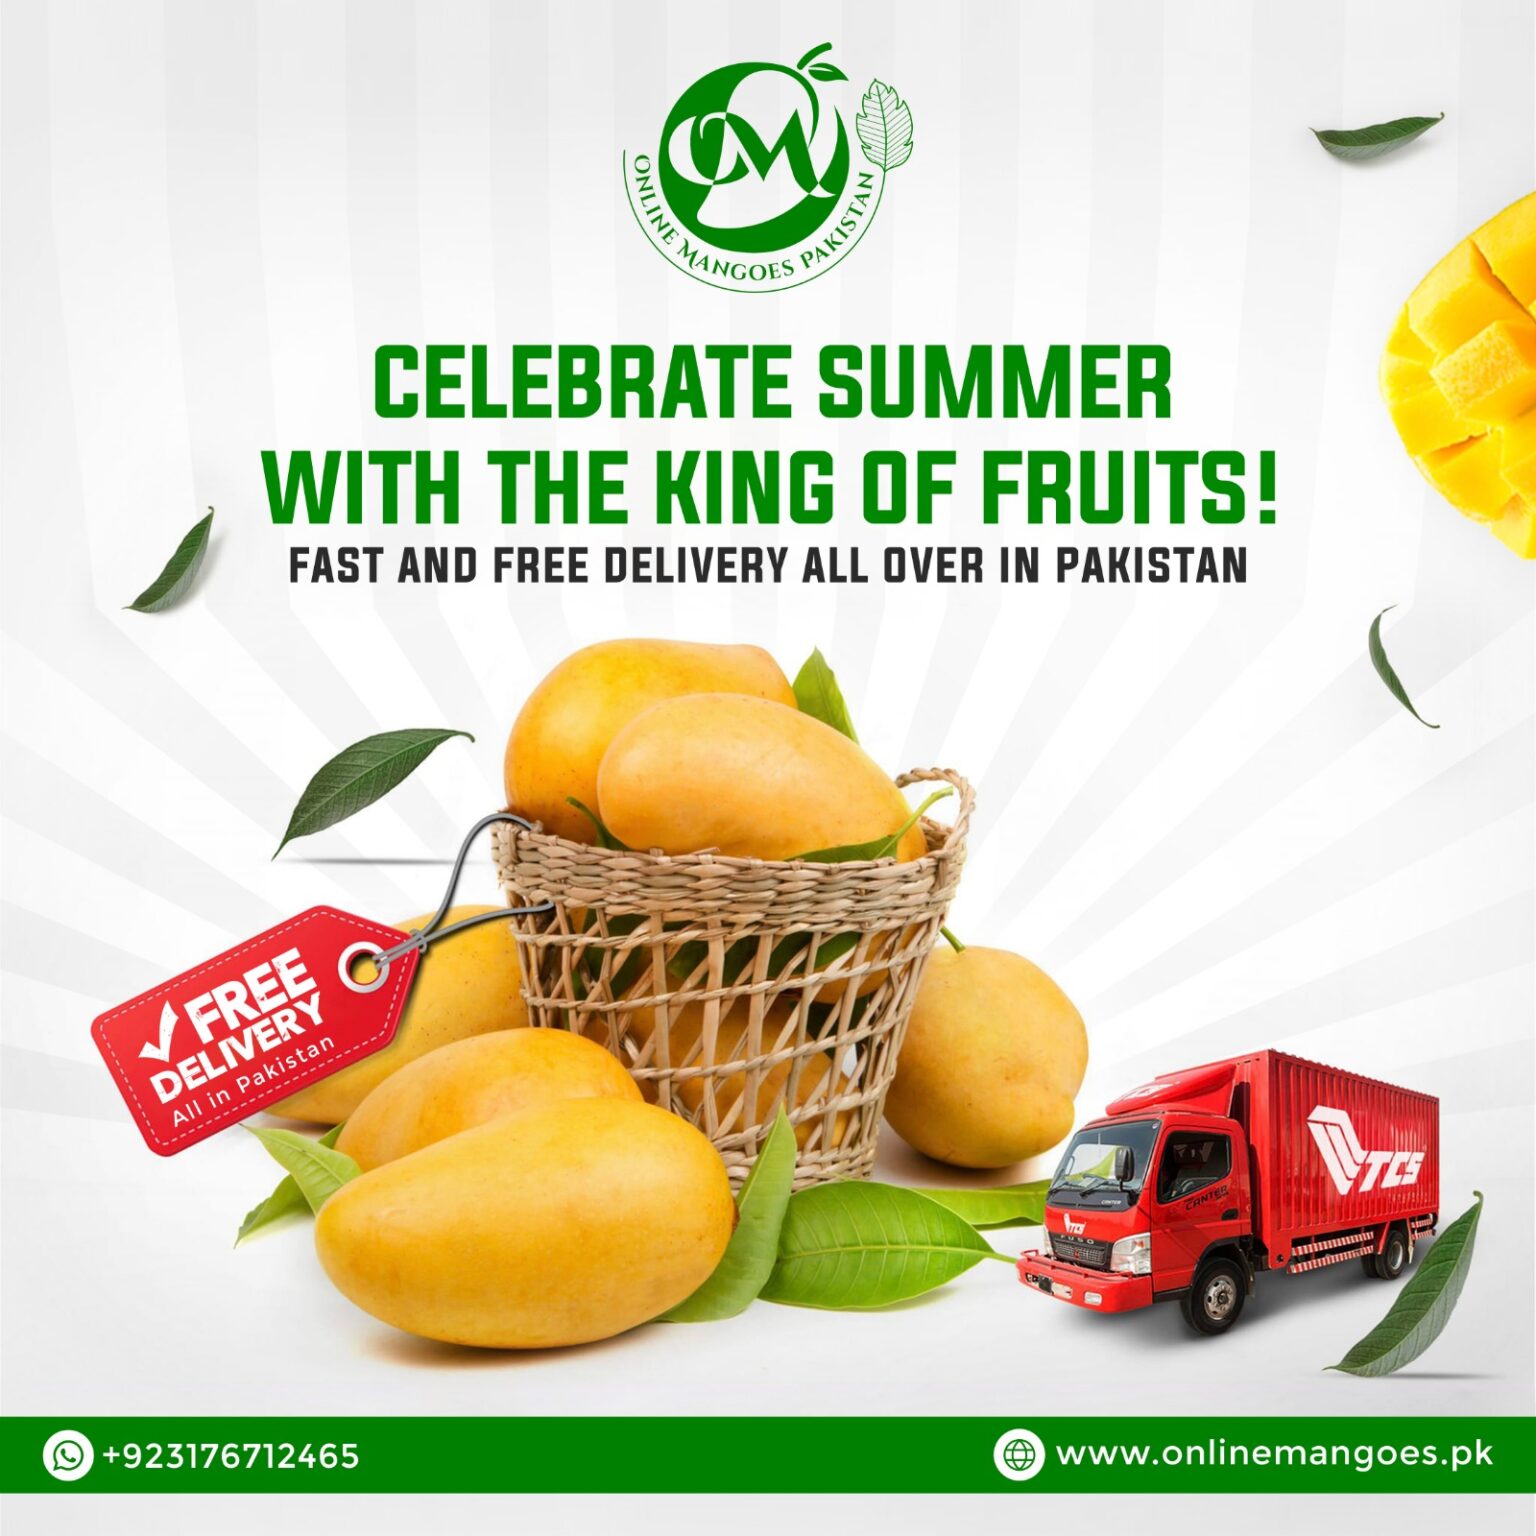 Free Home Delivery of Mangoes In Pakistan Online Mangoes PK